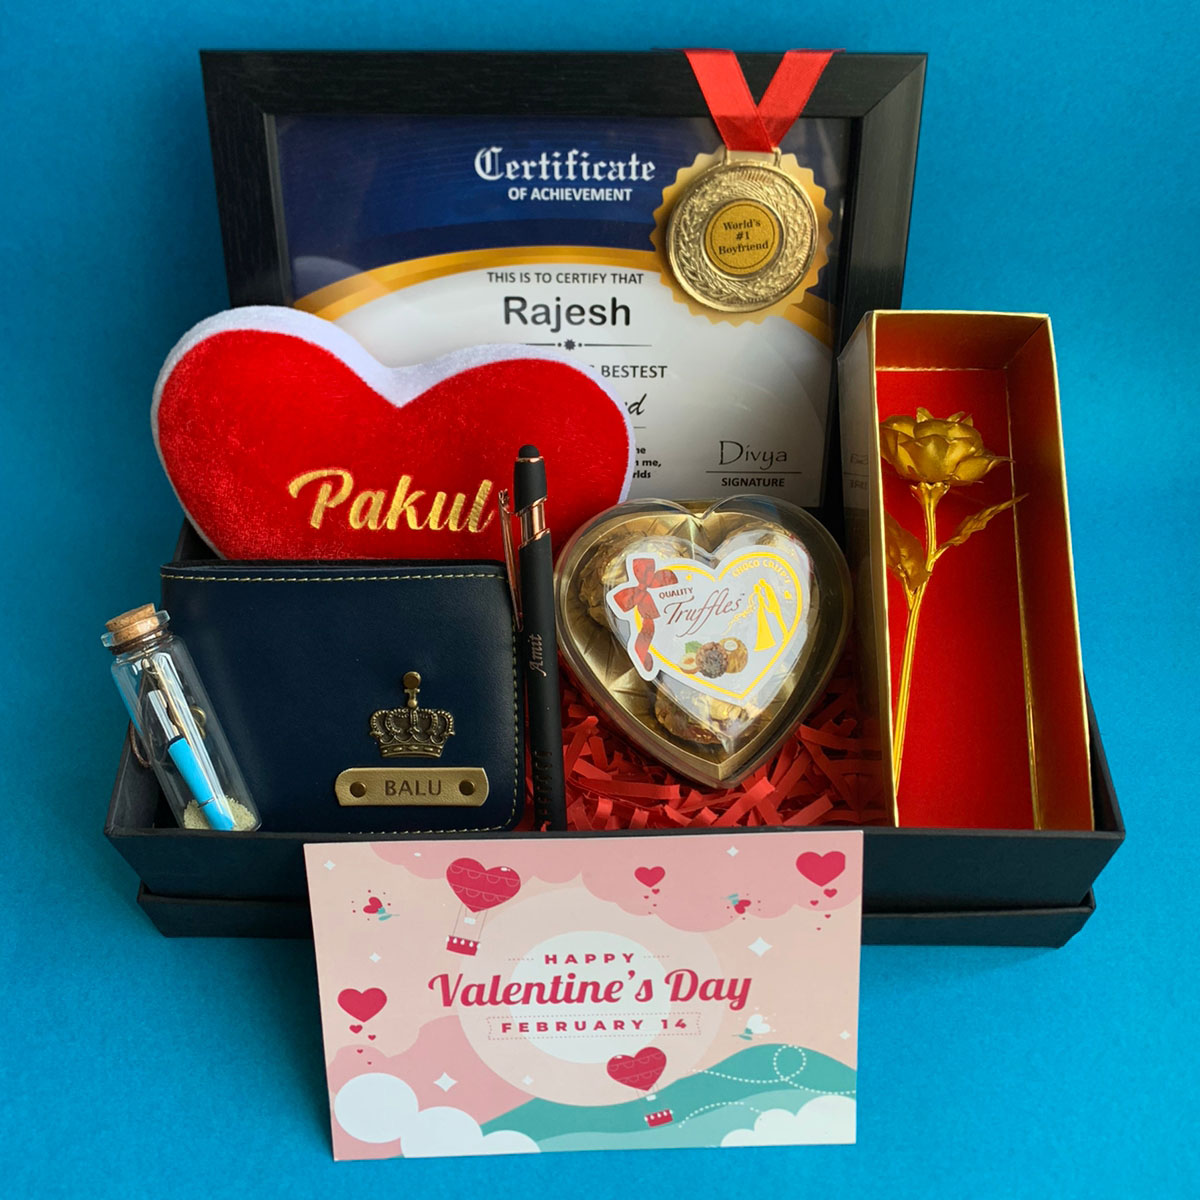 Top 25 Valentine's Day Gifts for Him - Updated | Valentines gifts for him,  Valentines day gifts for him, Valentine gifts